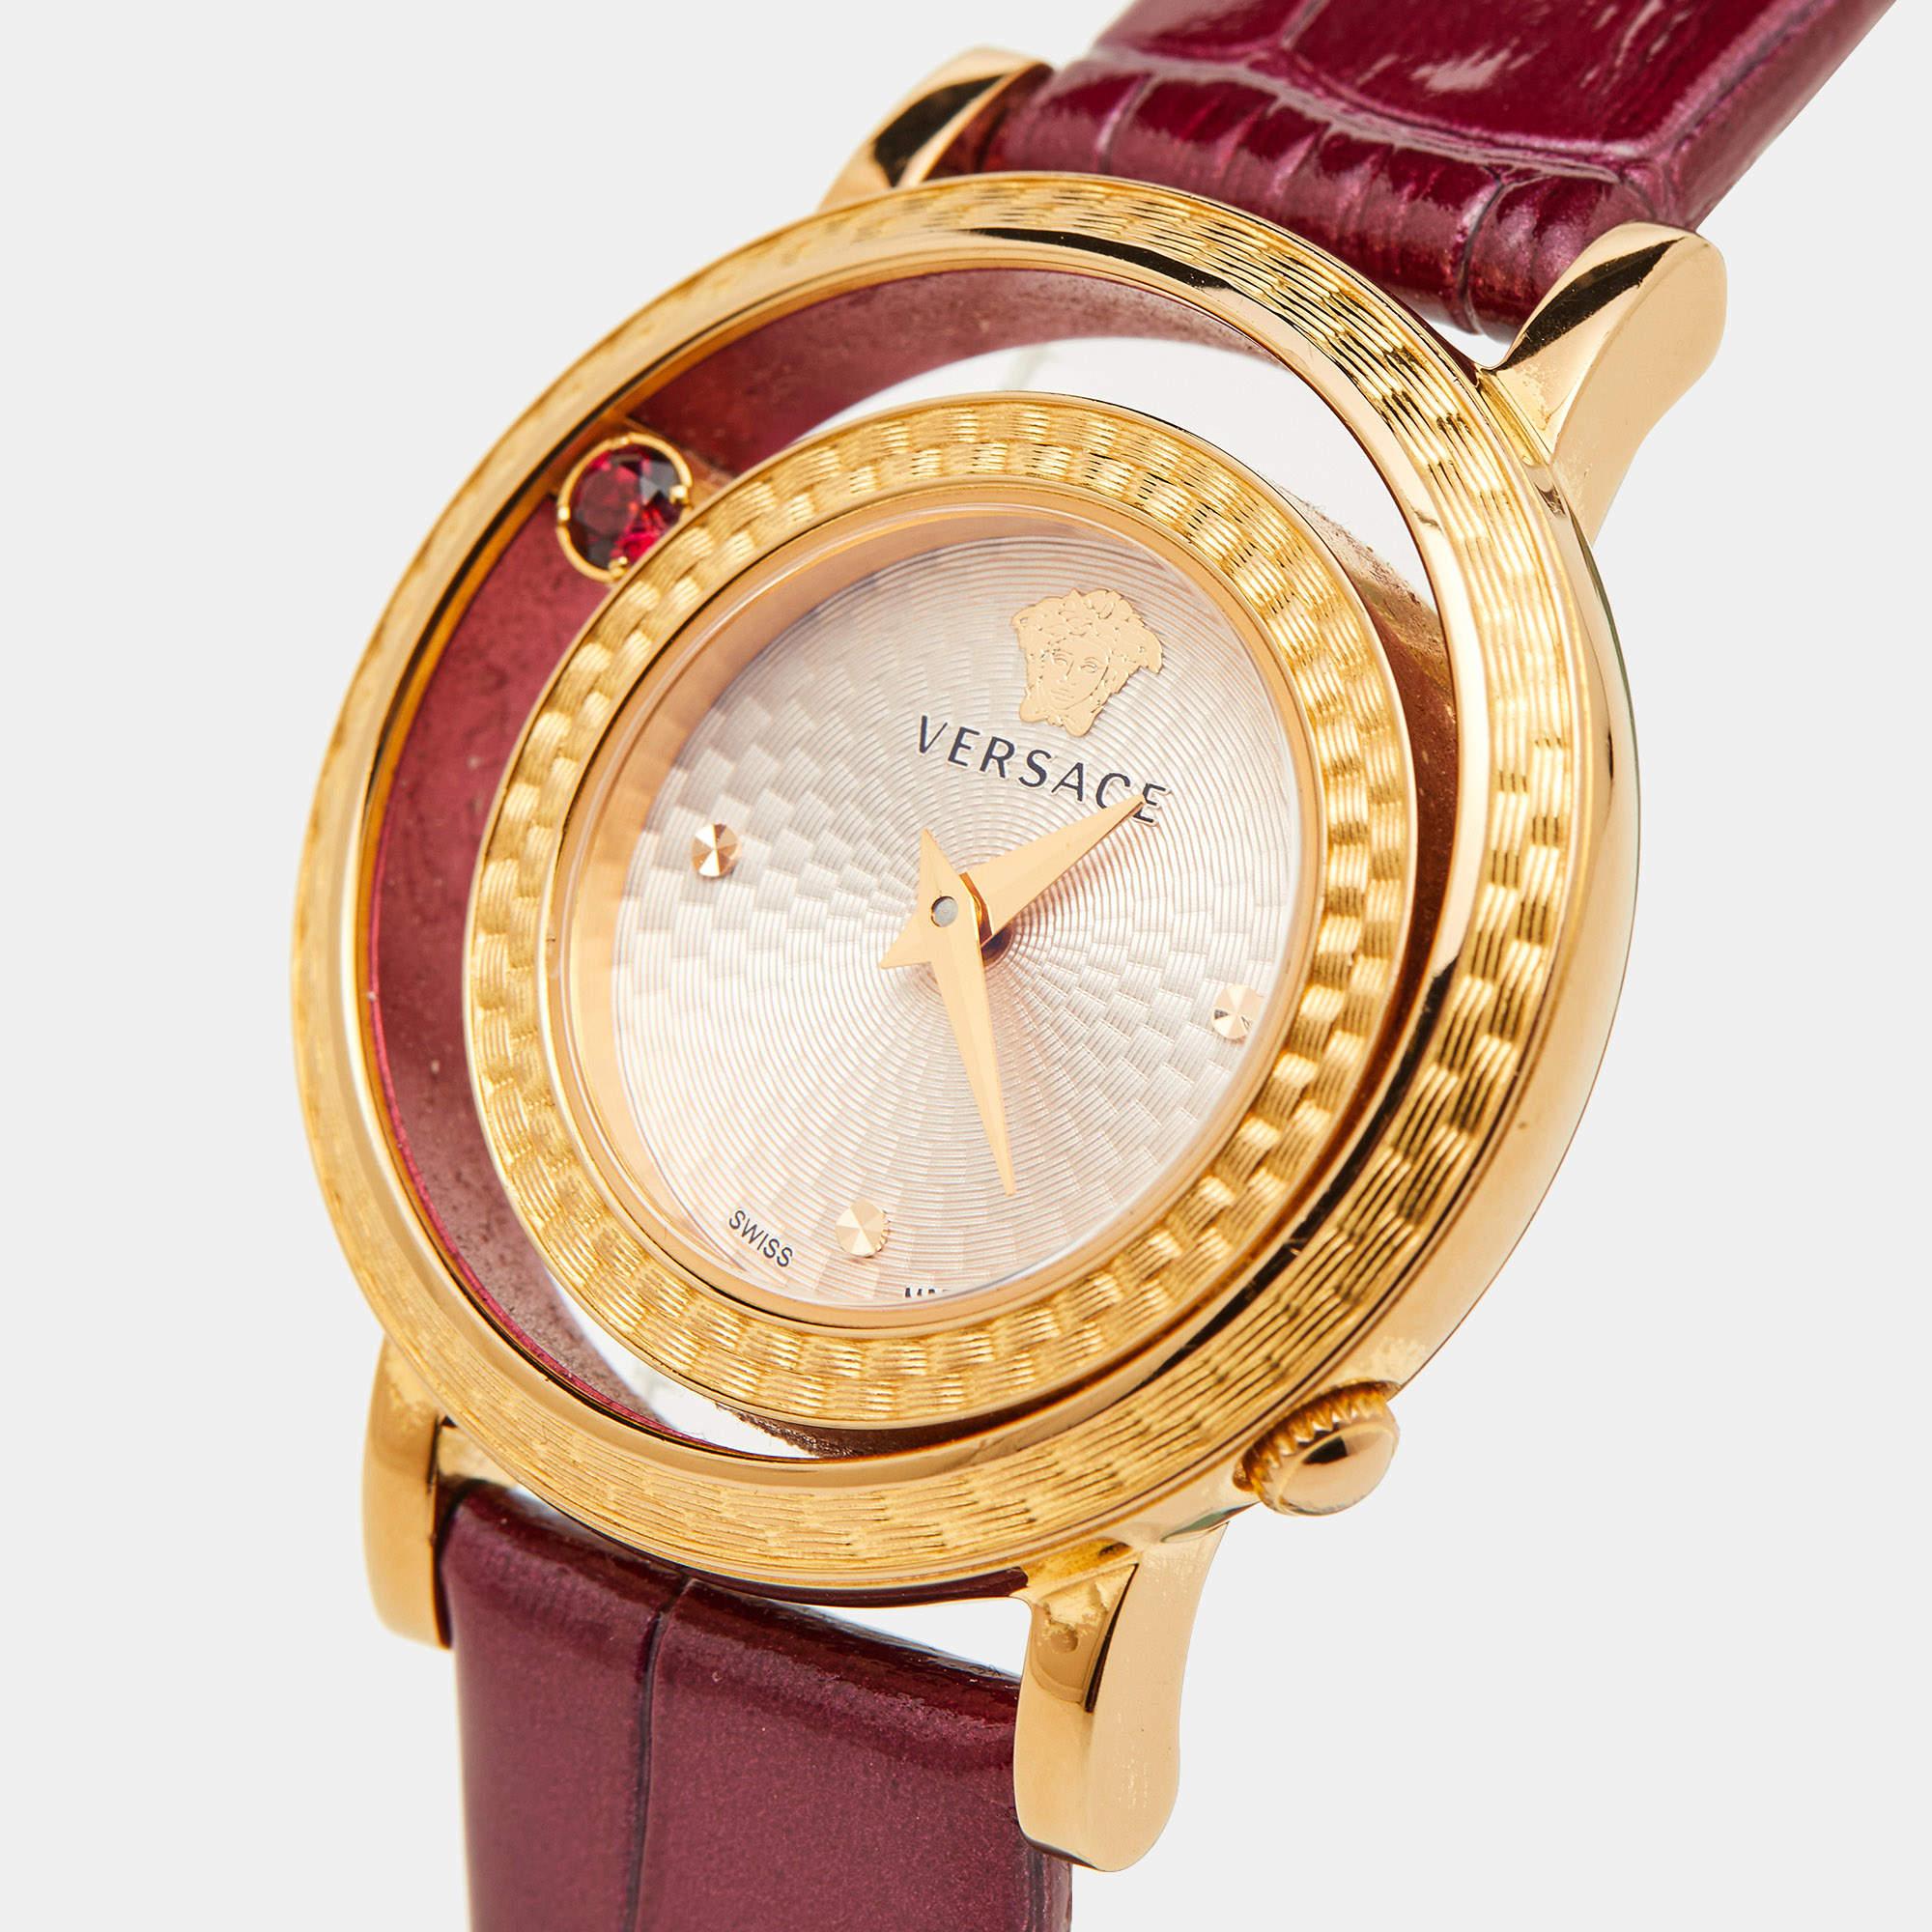 A timeless silhouette made of high-quality materials and packed with precision and luxury makes this Versace women's wristwatch the perfect choice for a sophisticated finish to any look. It is a grand creation to elevate the everyday